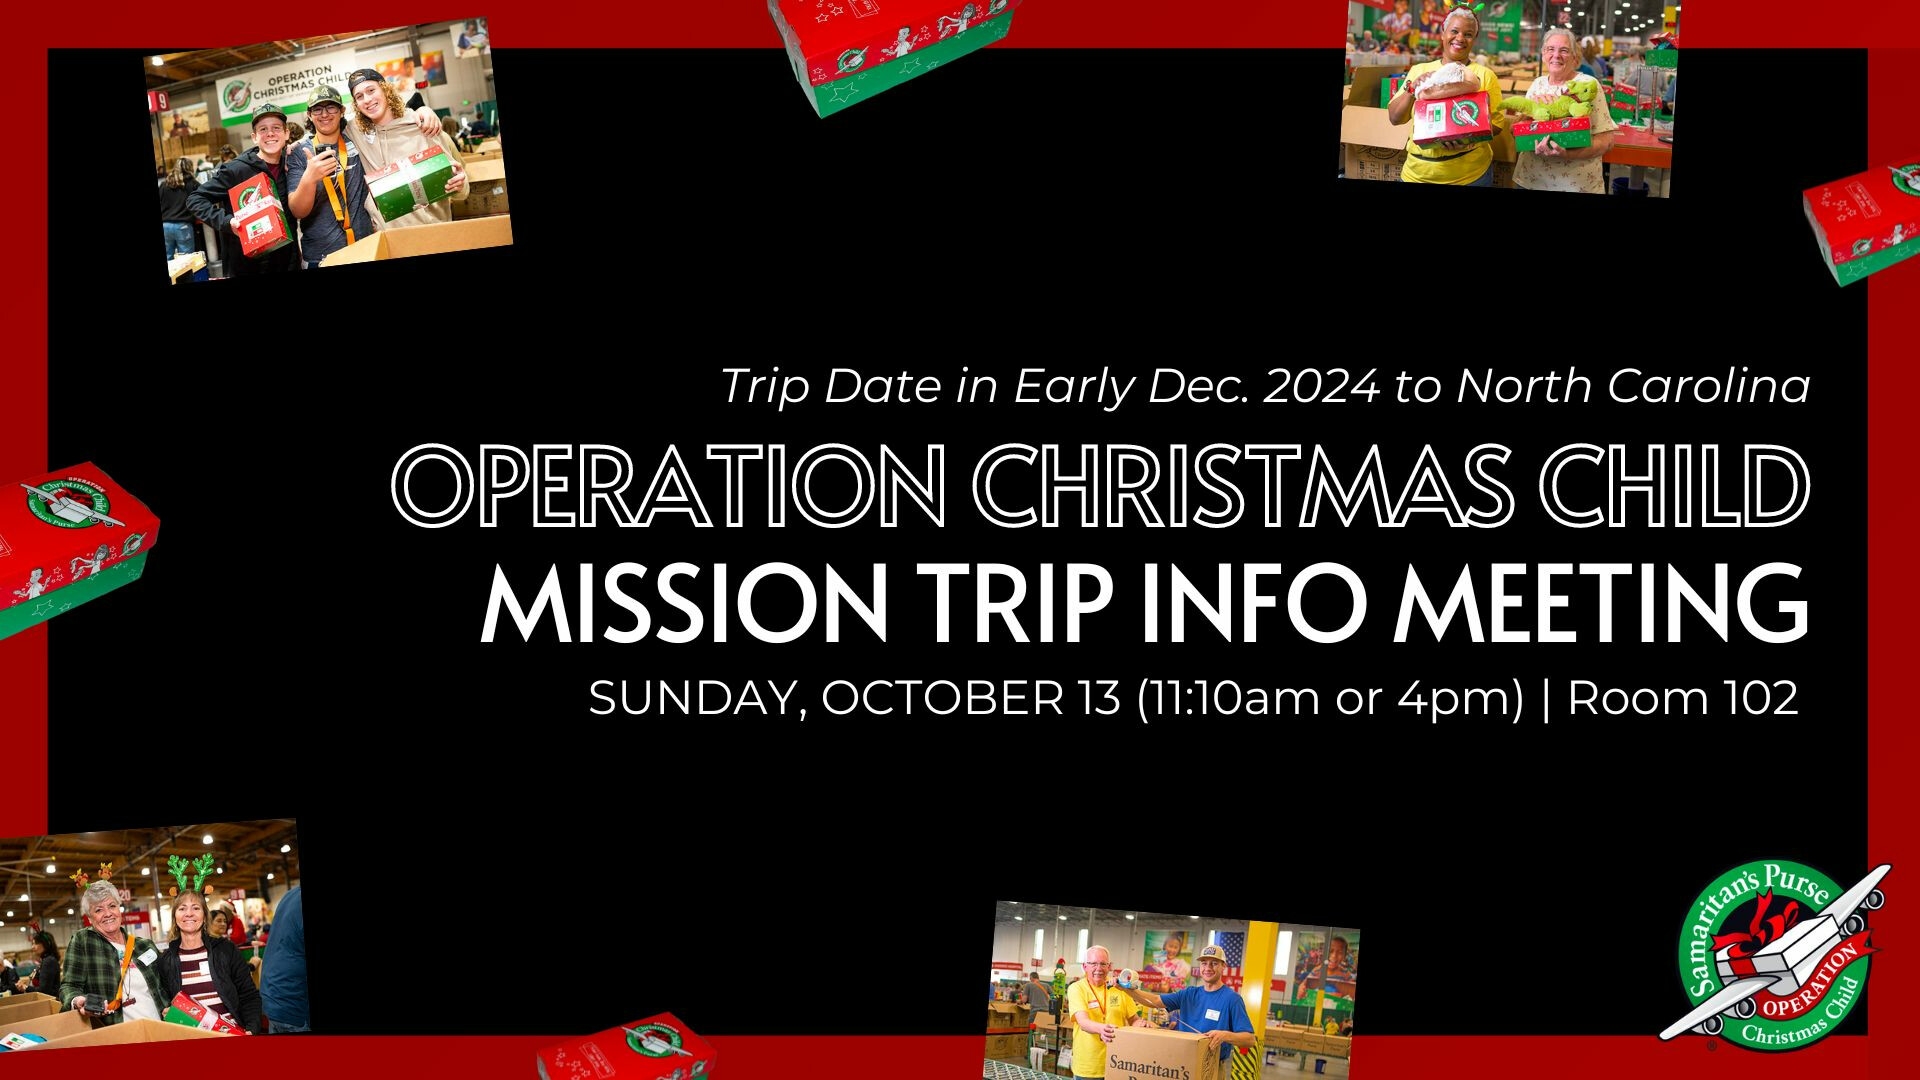 Operation Christmas Child Mission Trip Info Meeting